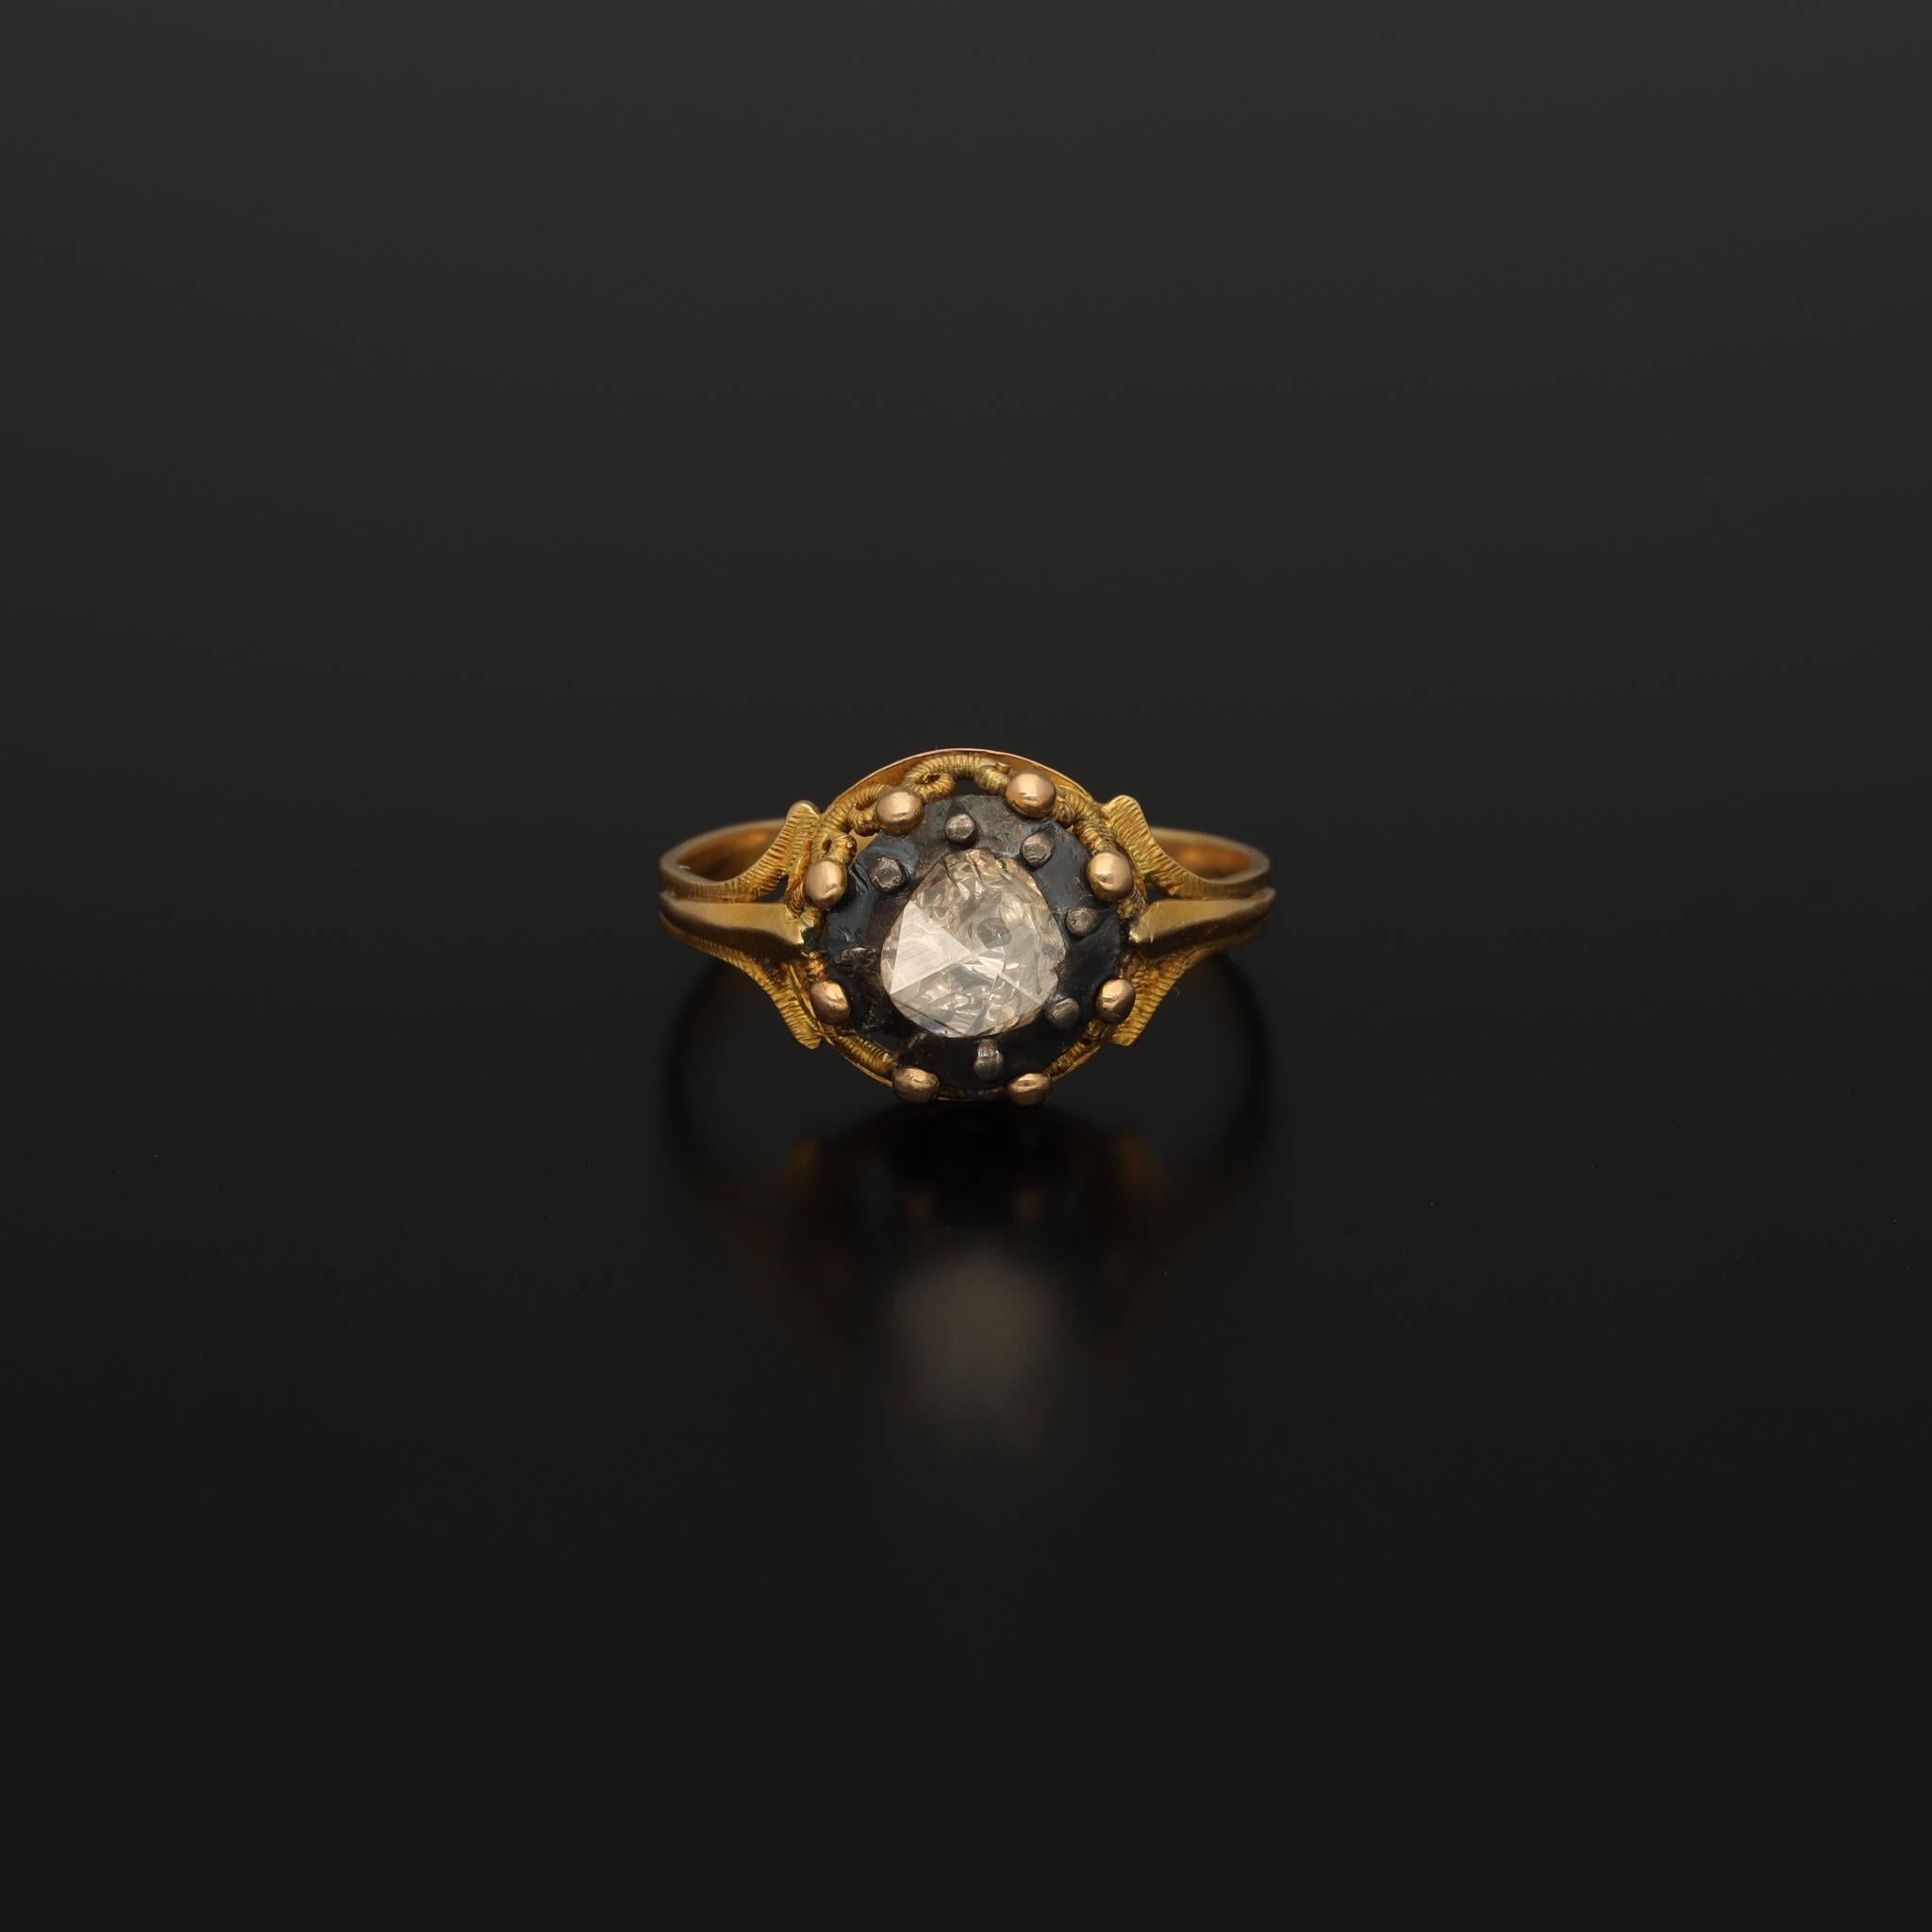 An absolutely incredible antique Georgian era diamond solitaire ring!

This 300 years old ring ring boasts a stunning highly elevated crown set with a HUGE sparkling diamond of circa 1 carat. The diamond is set on silver and foiled on its nest to